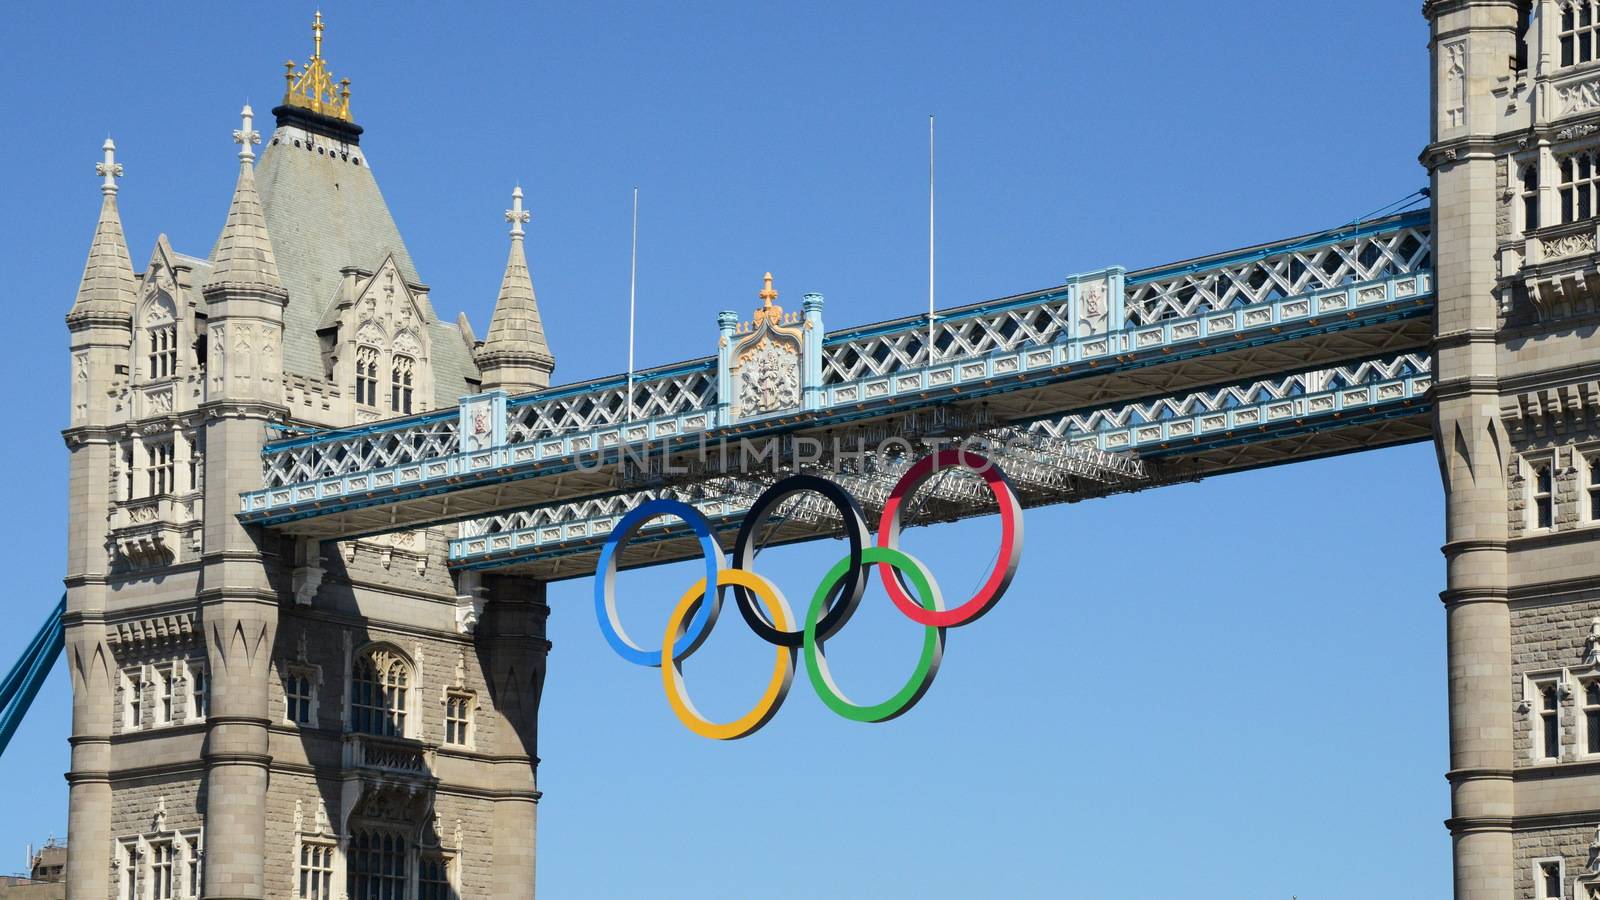 Tower bridge with Olympic rings for 2012 games